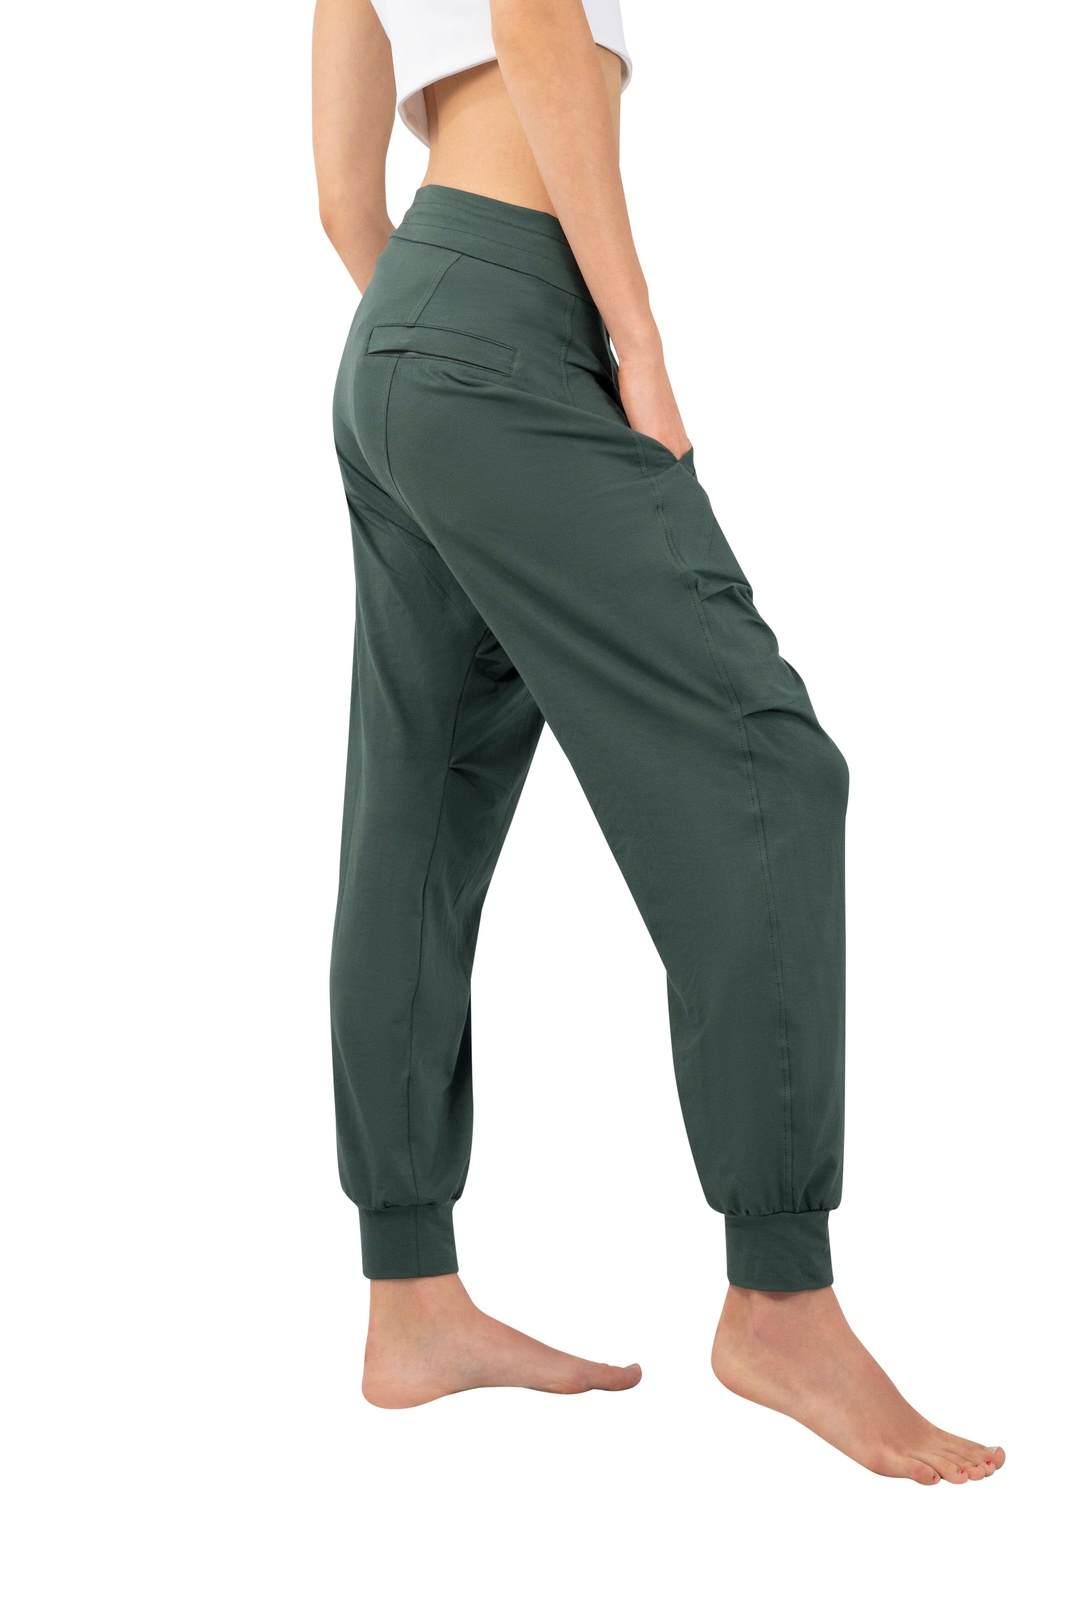 Ladies harem trousers by Ekoluxe sustainable clothing brand